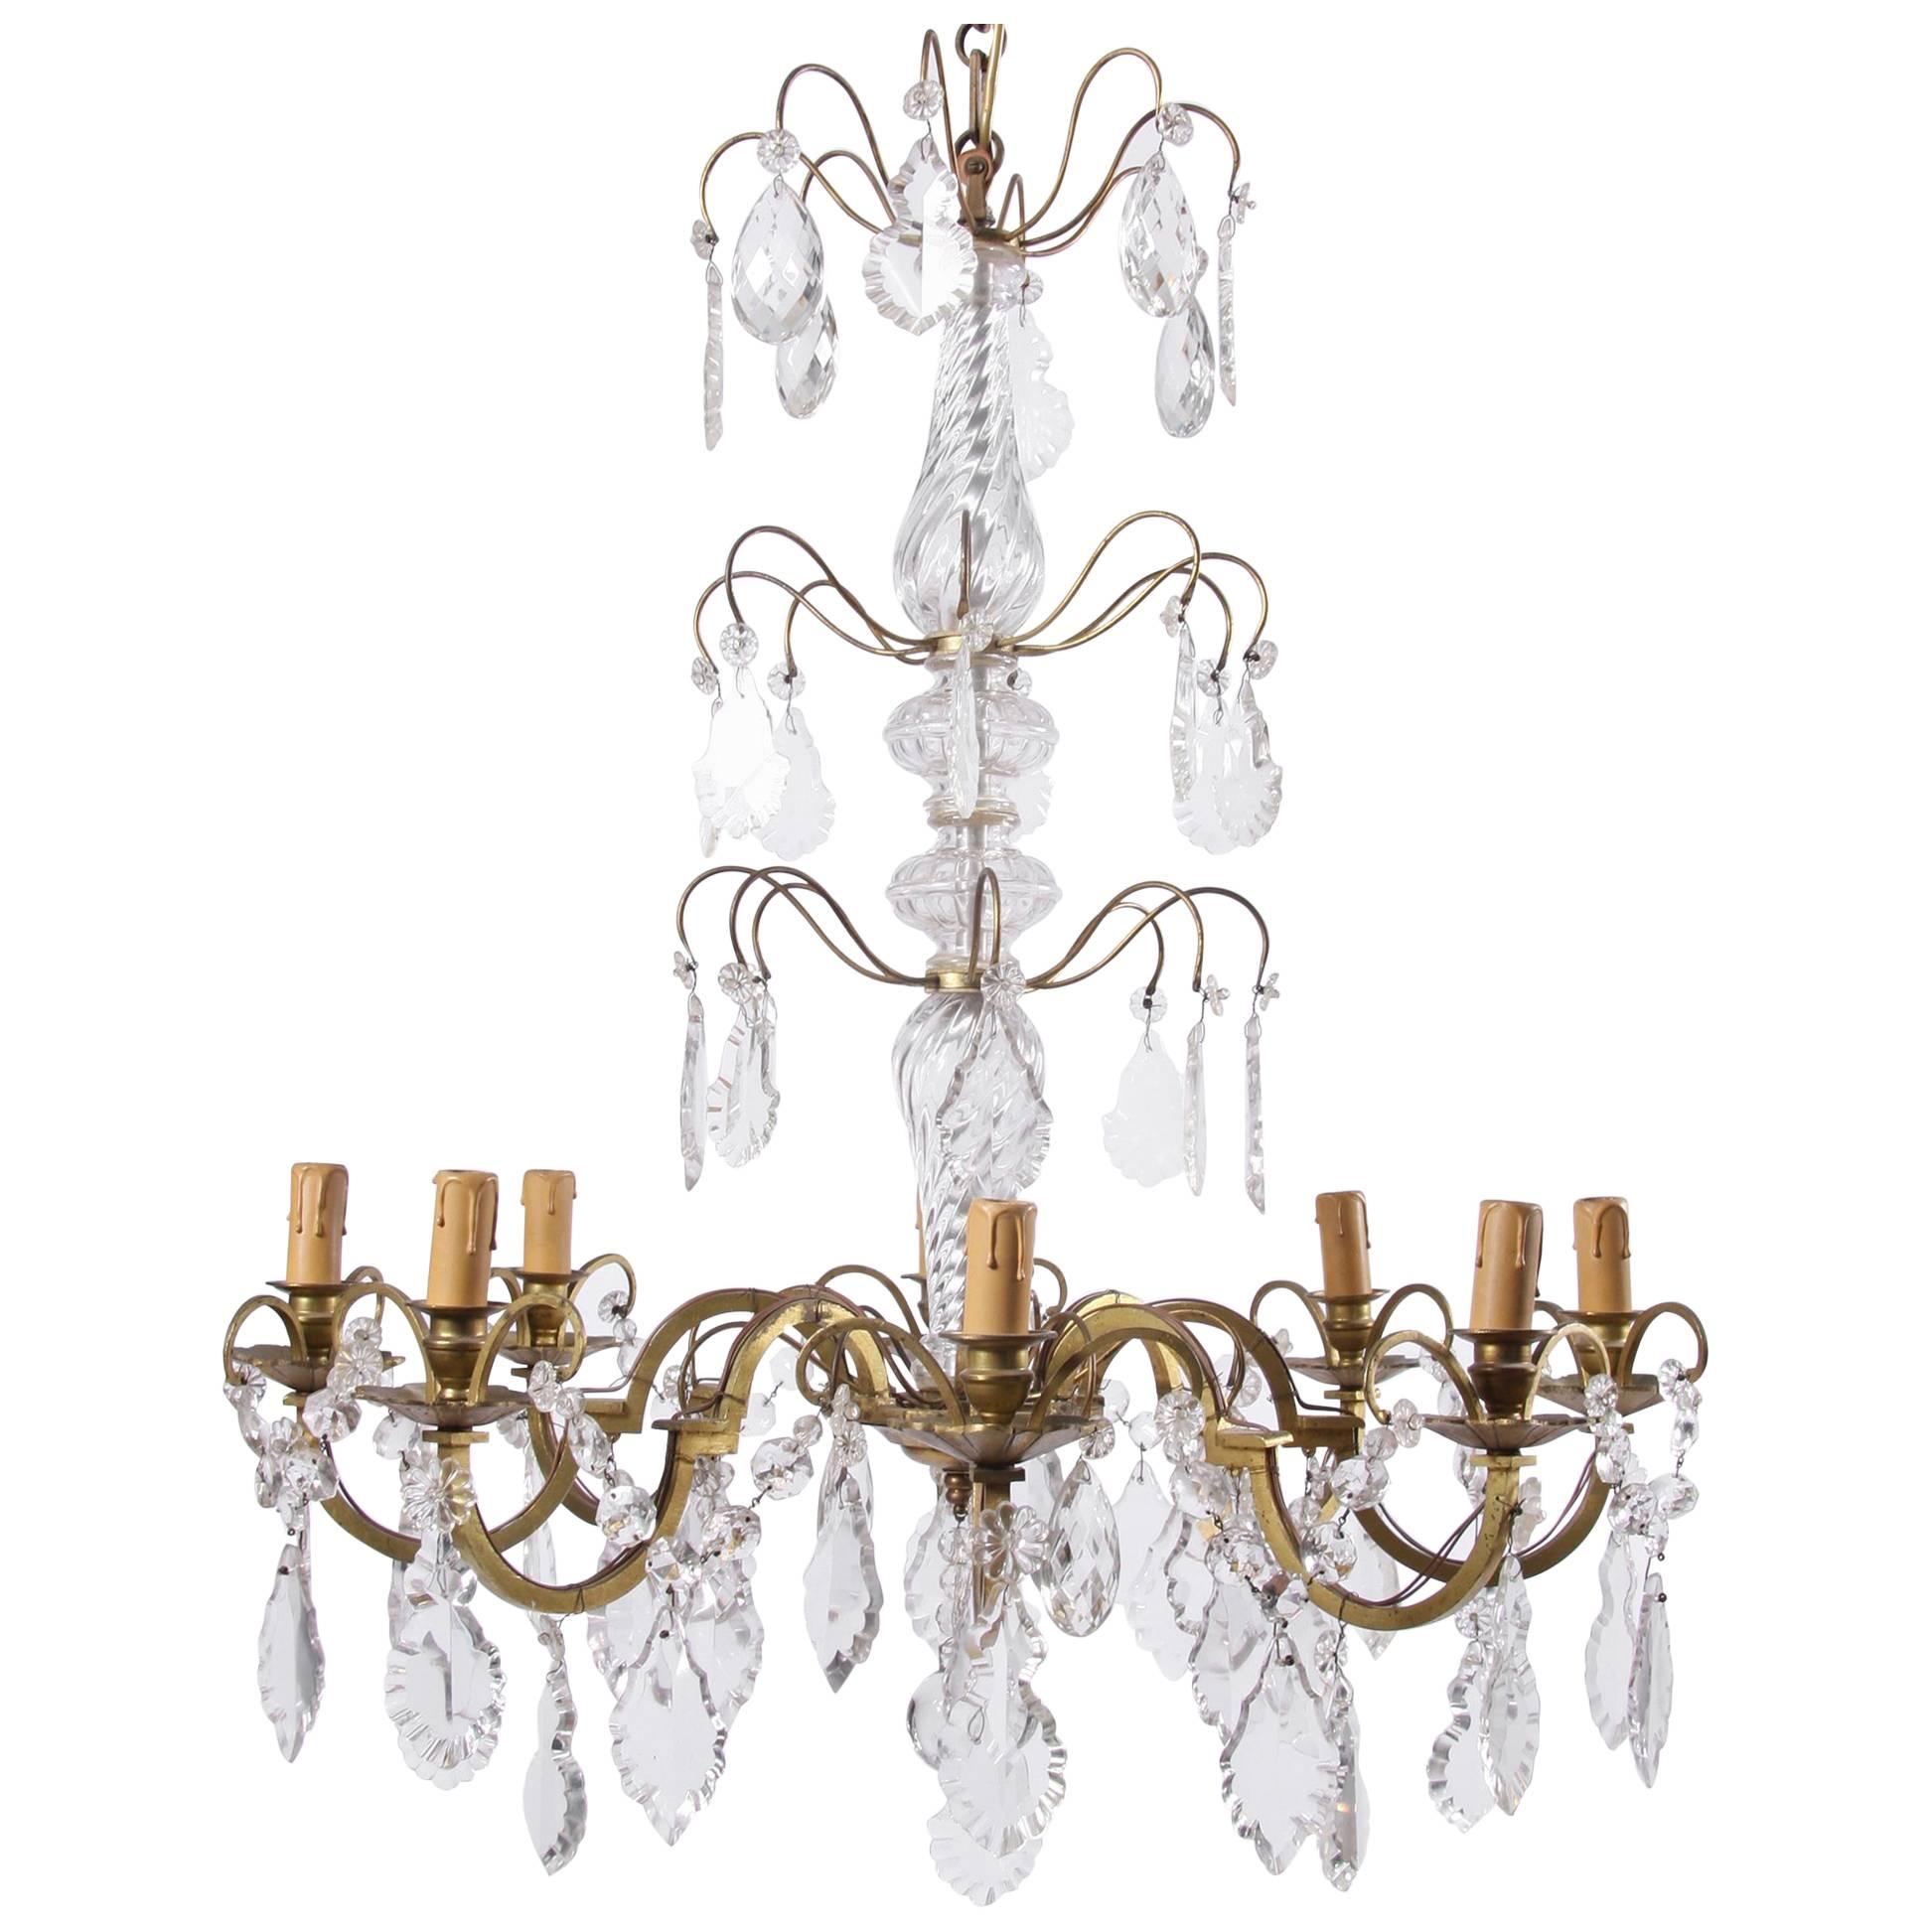 Eight-Branch Crystal Chandelier